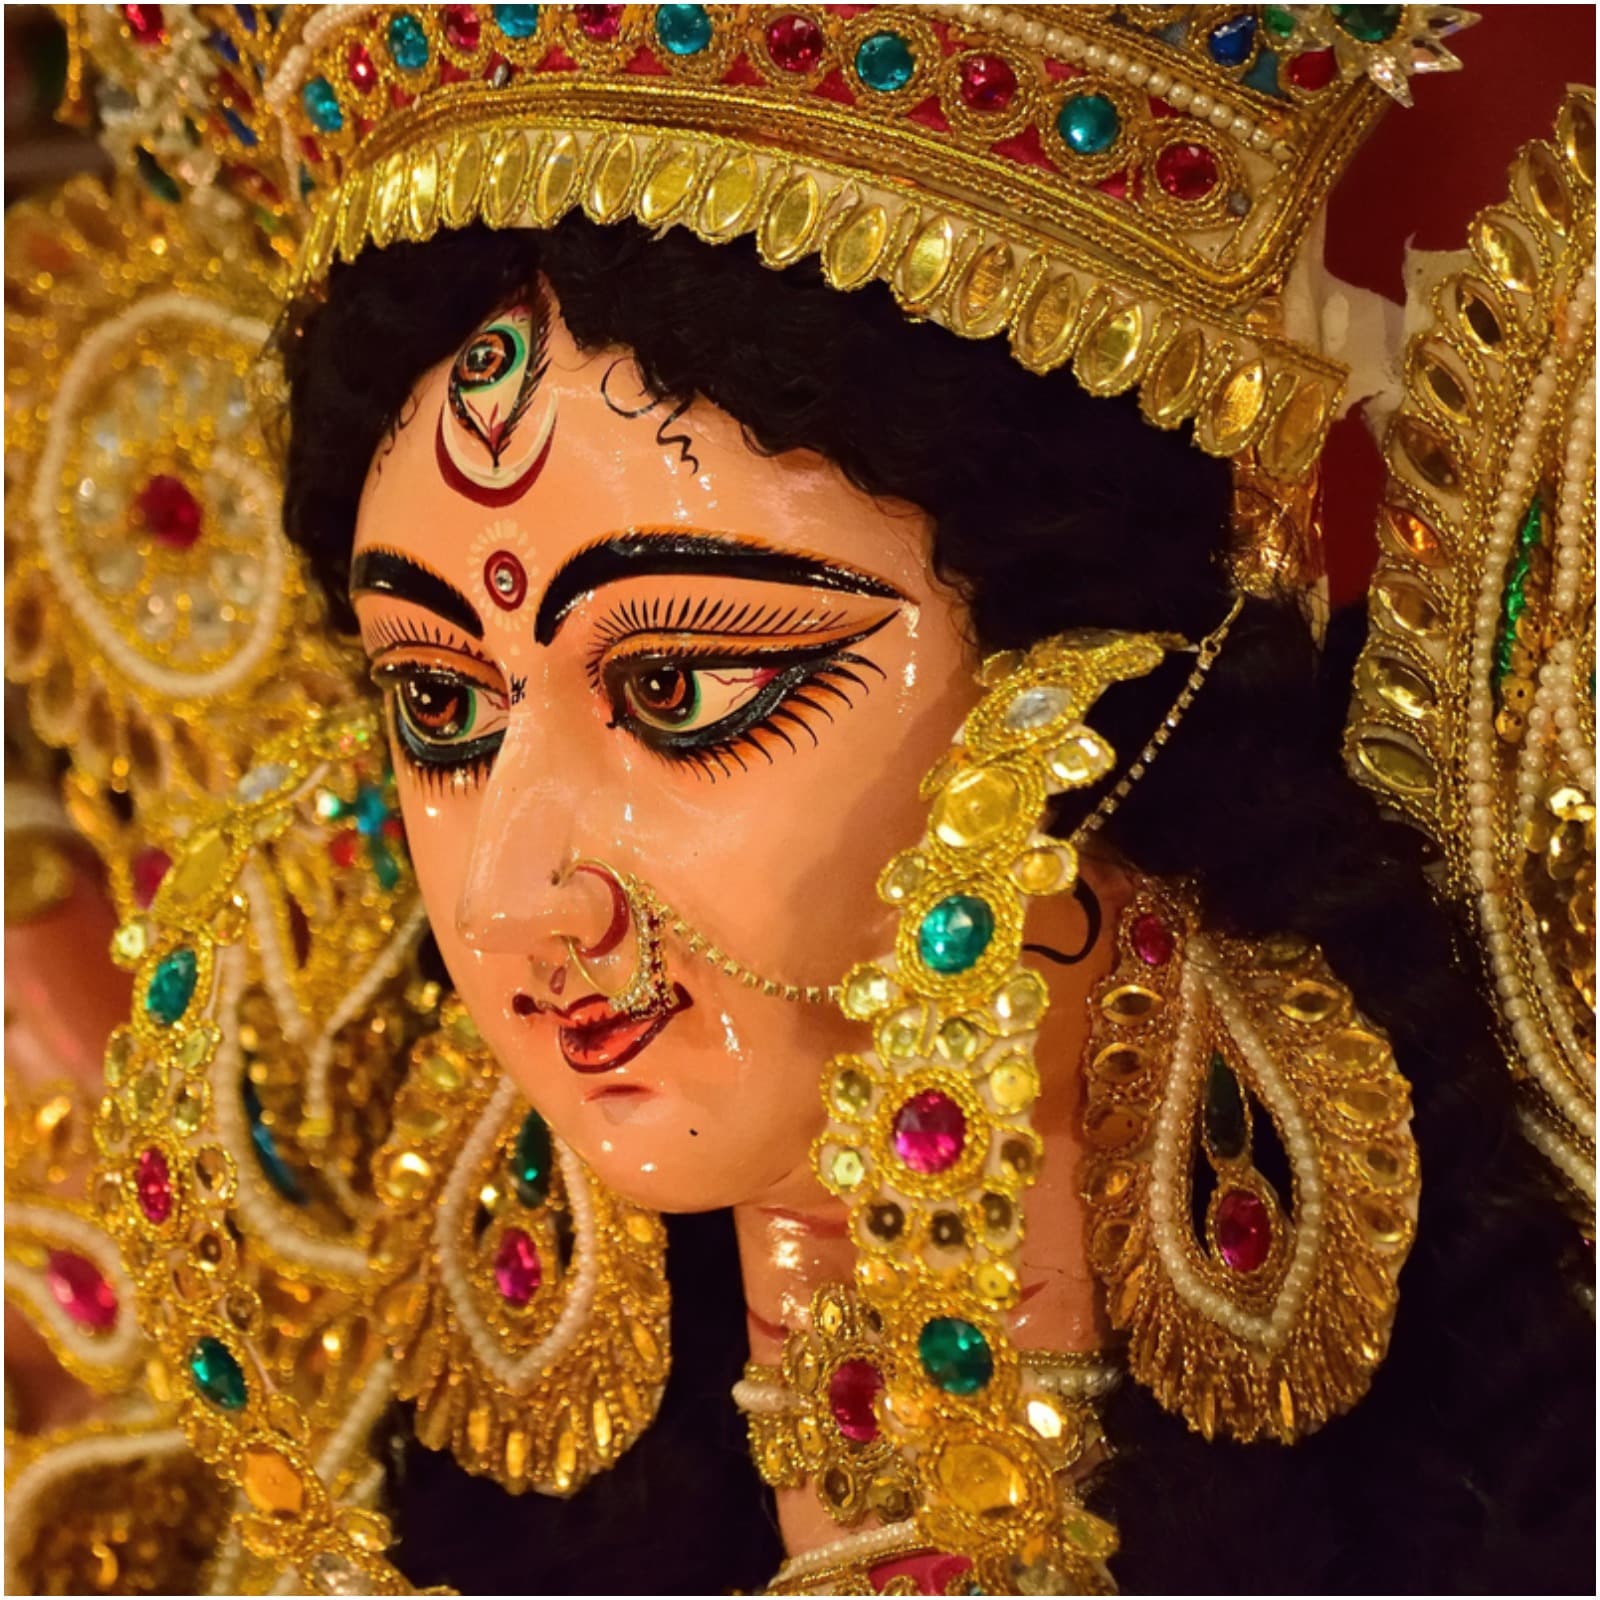 Hindus believe that every year on this day, the goddess Durga arrives on Earth. (Representative Image: Shutterstock)